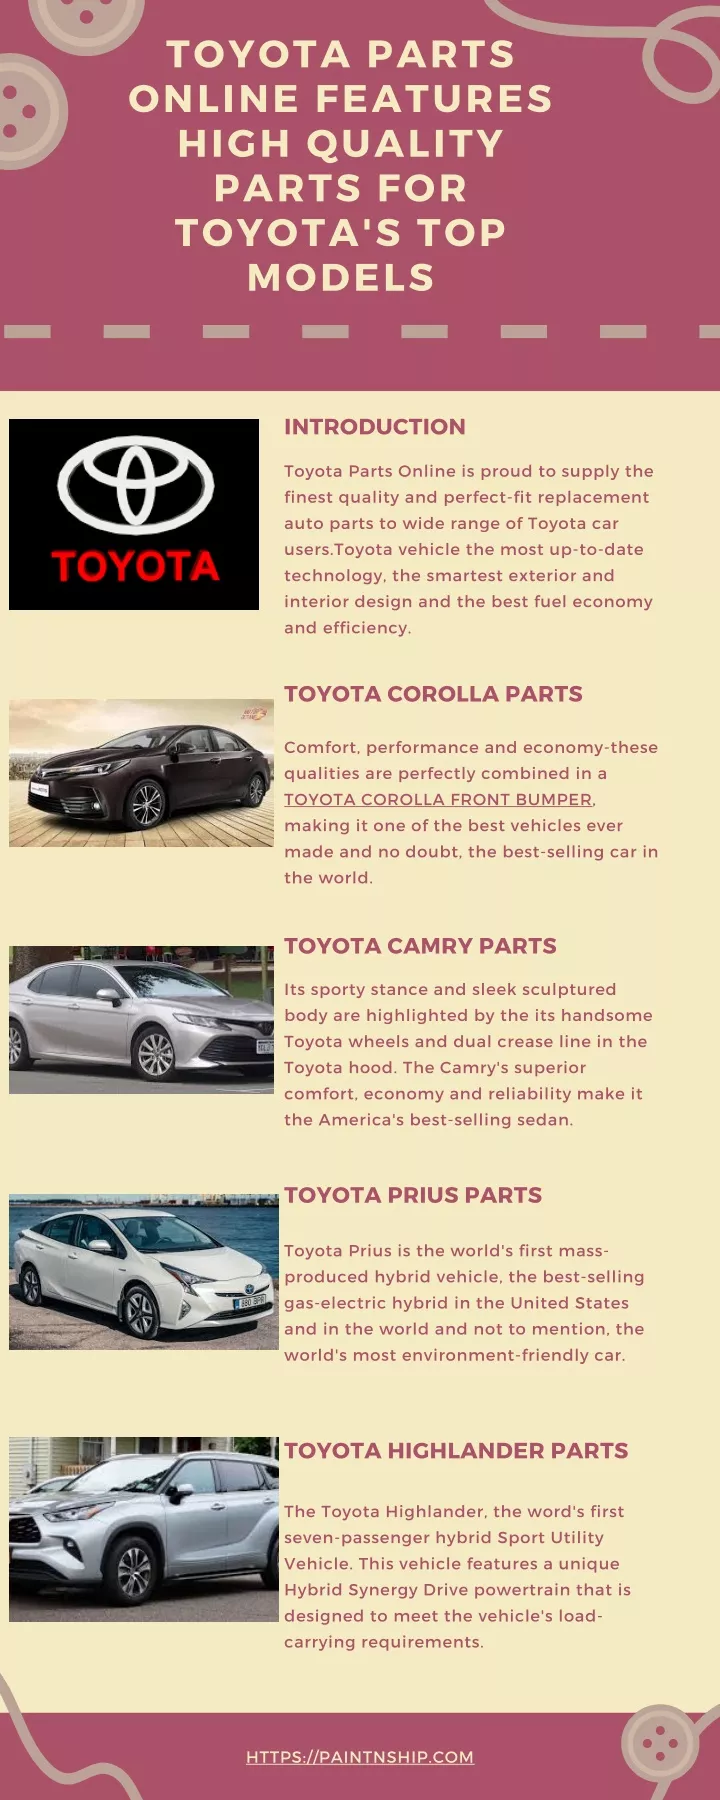 toyota parts online features high quality parts